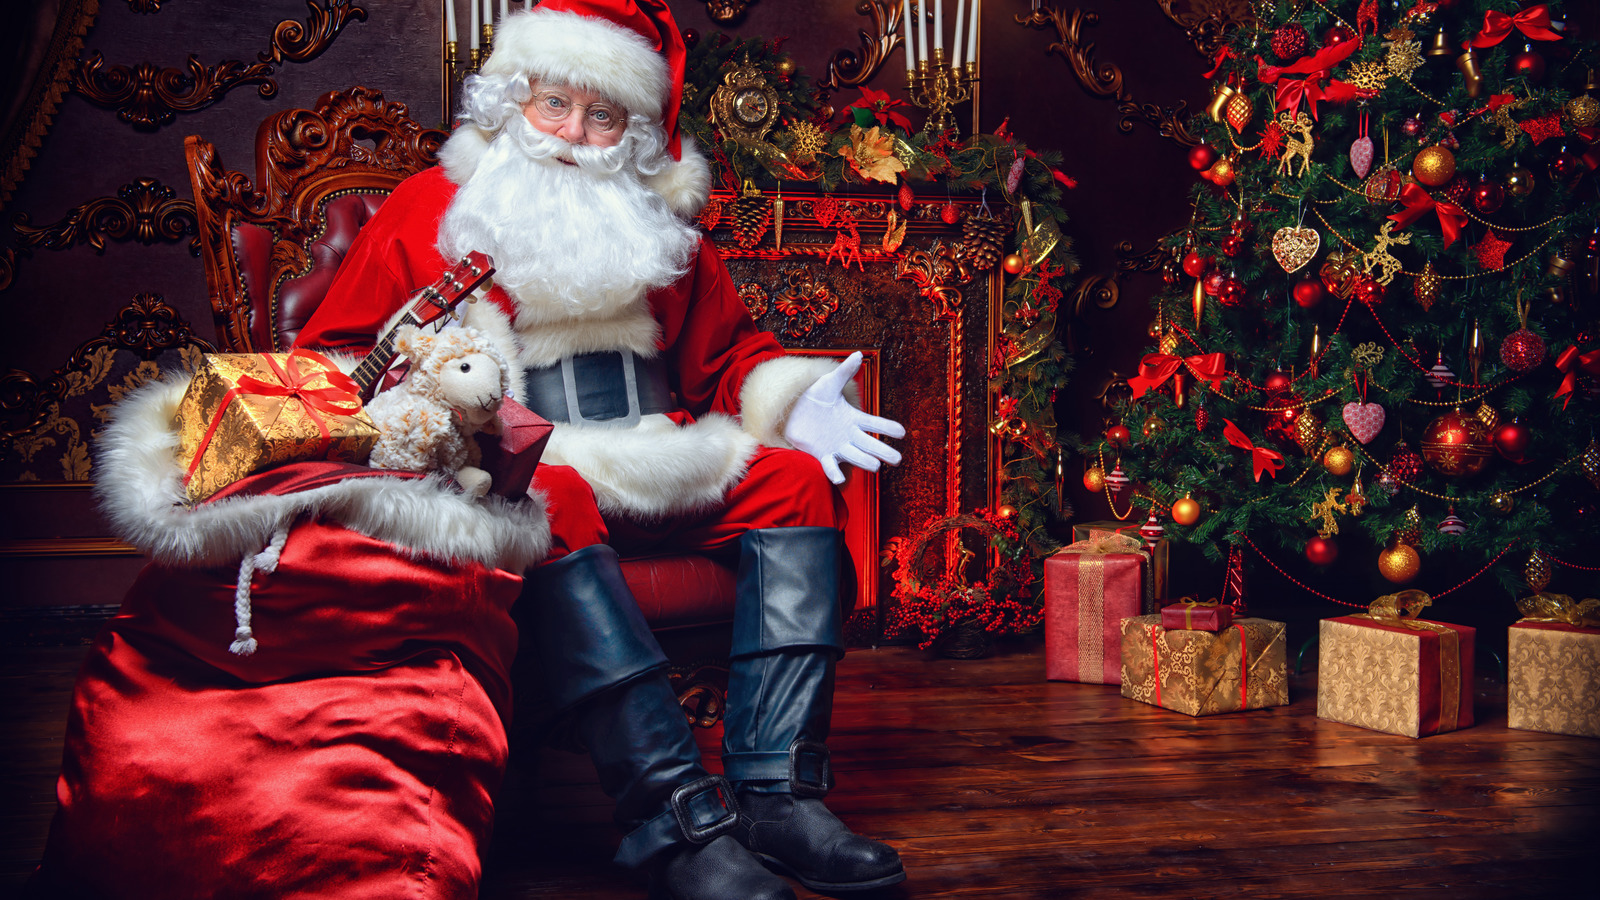 Incredible Compilation of Over 999 Genuine Santa Claus Images in